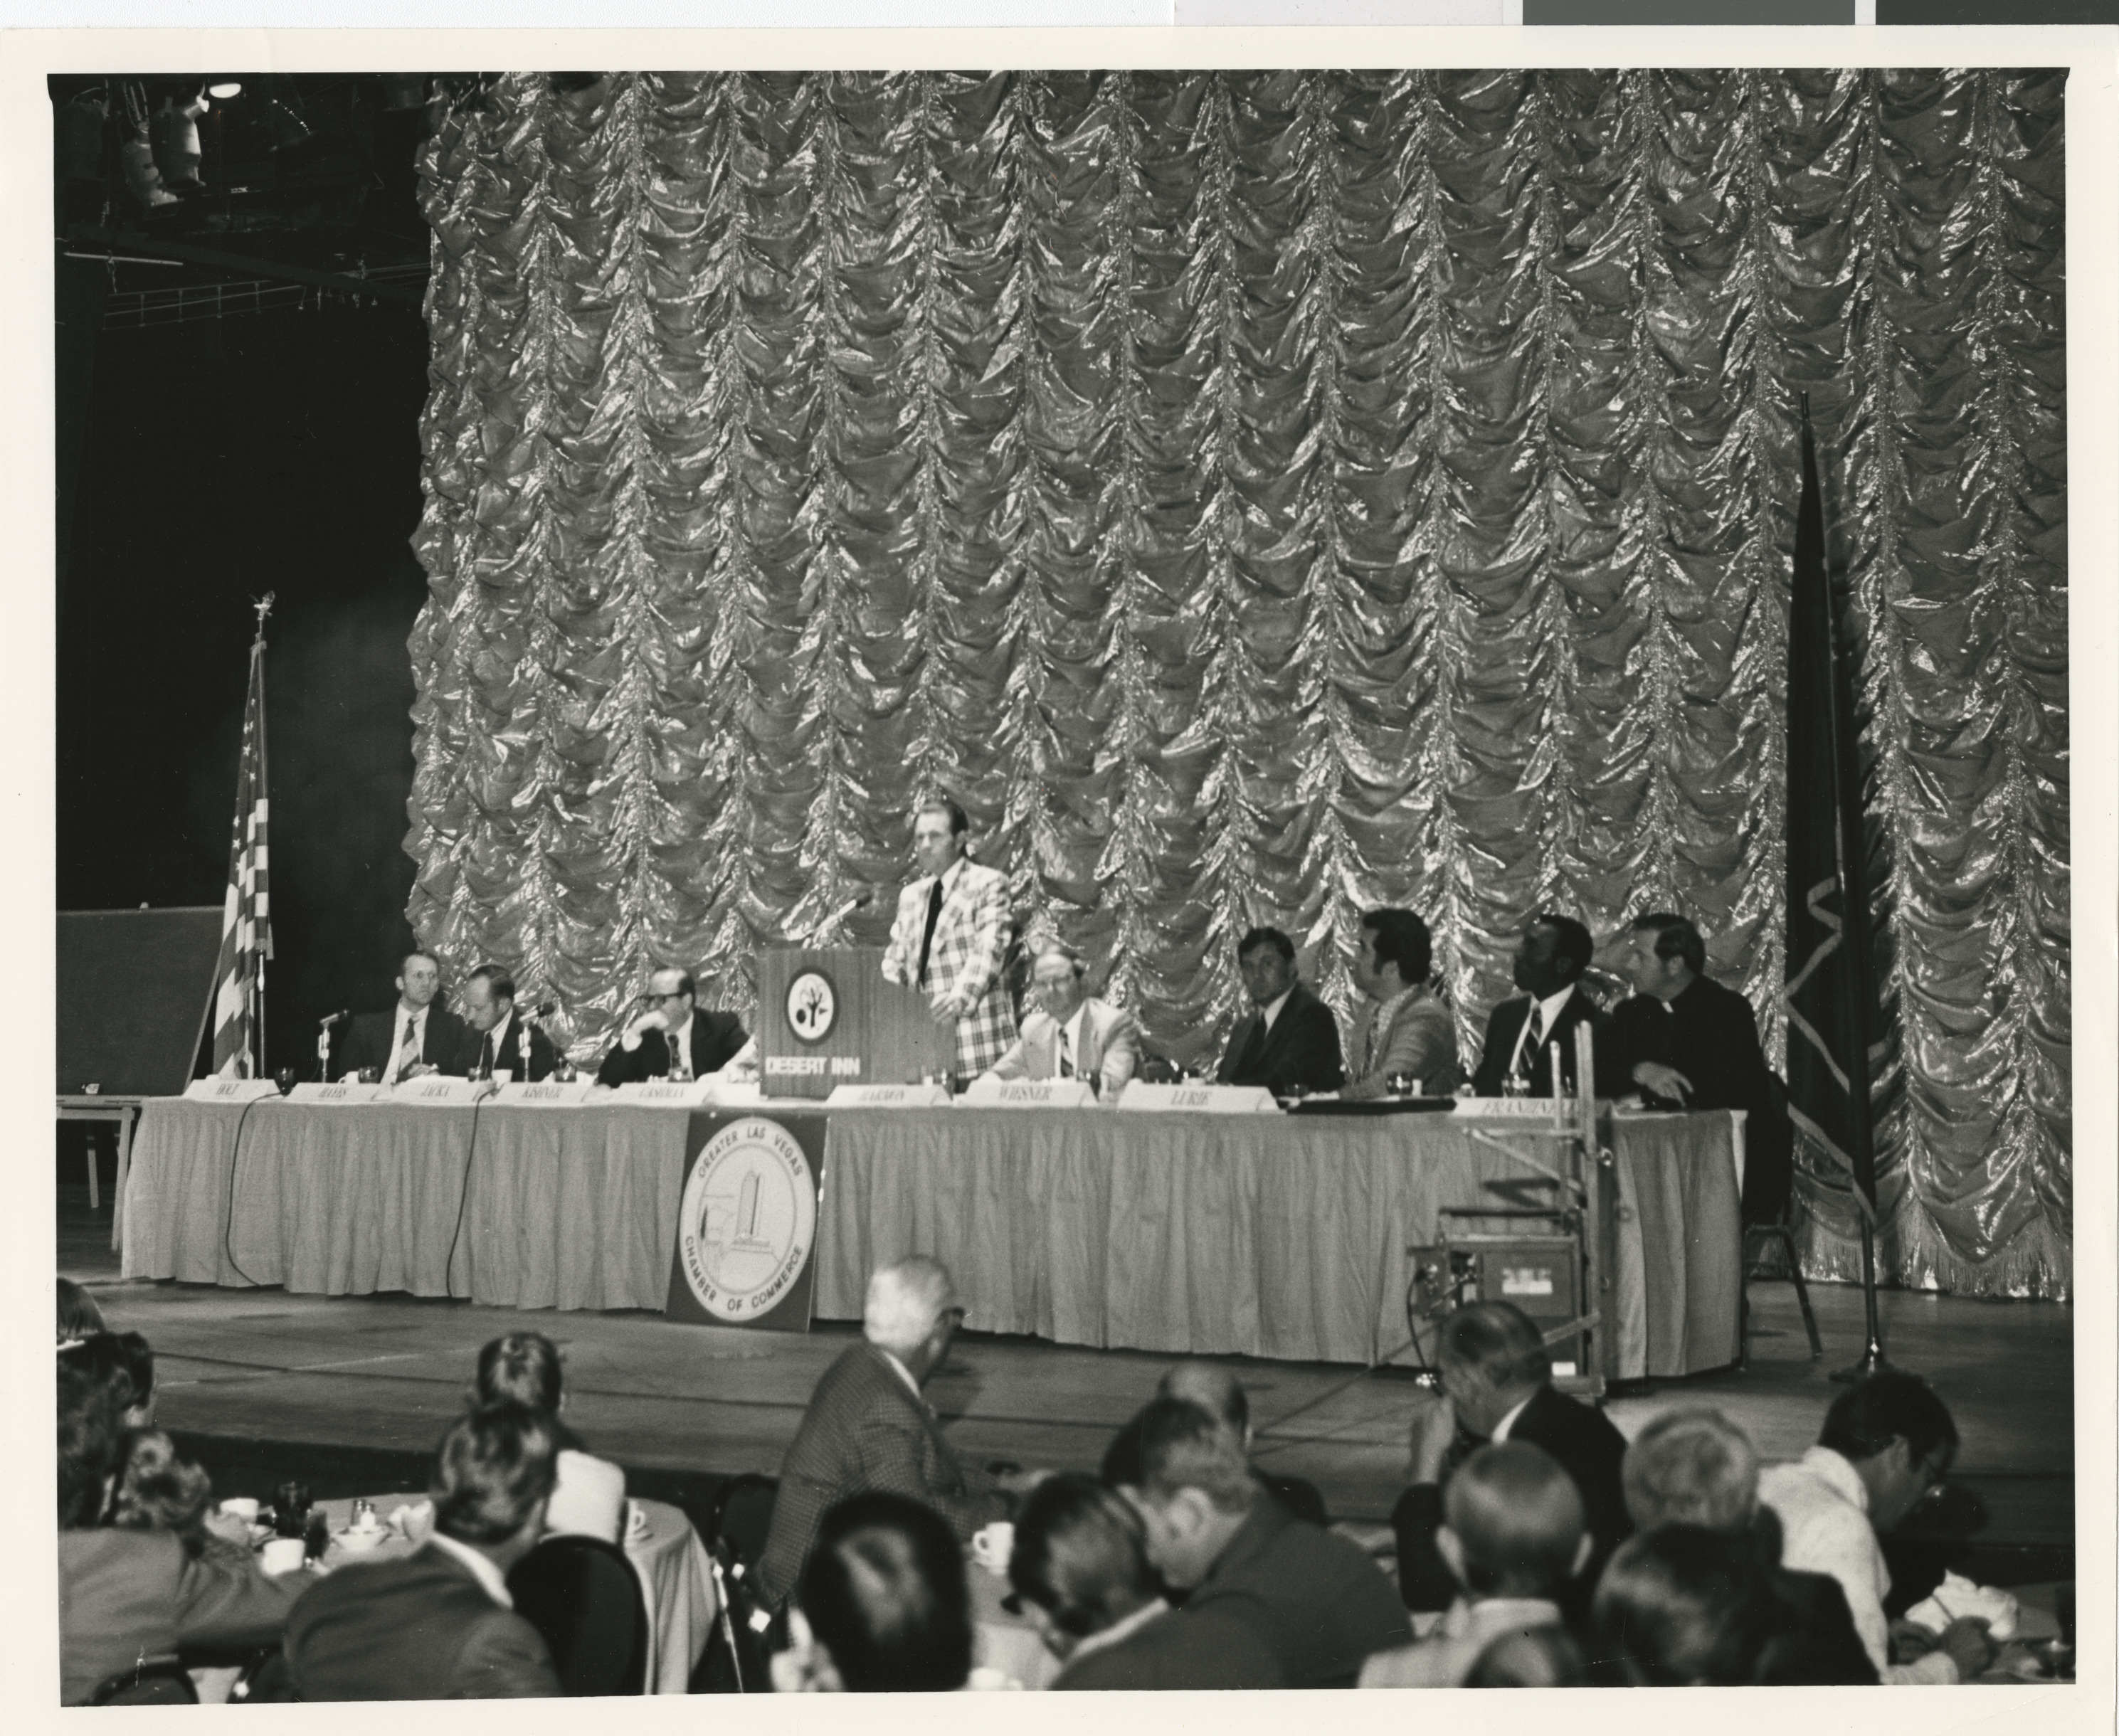 Photograph of a Chamber of Commerce meeting at the Desert Inn